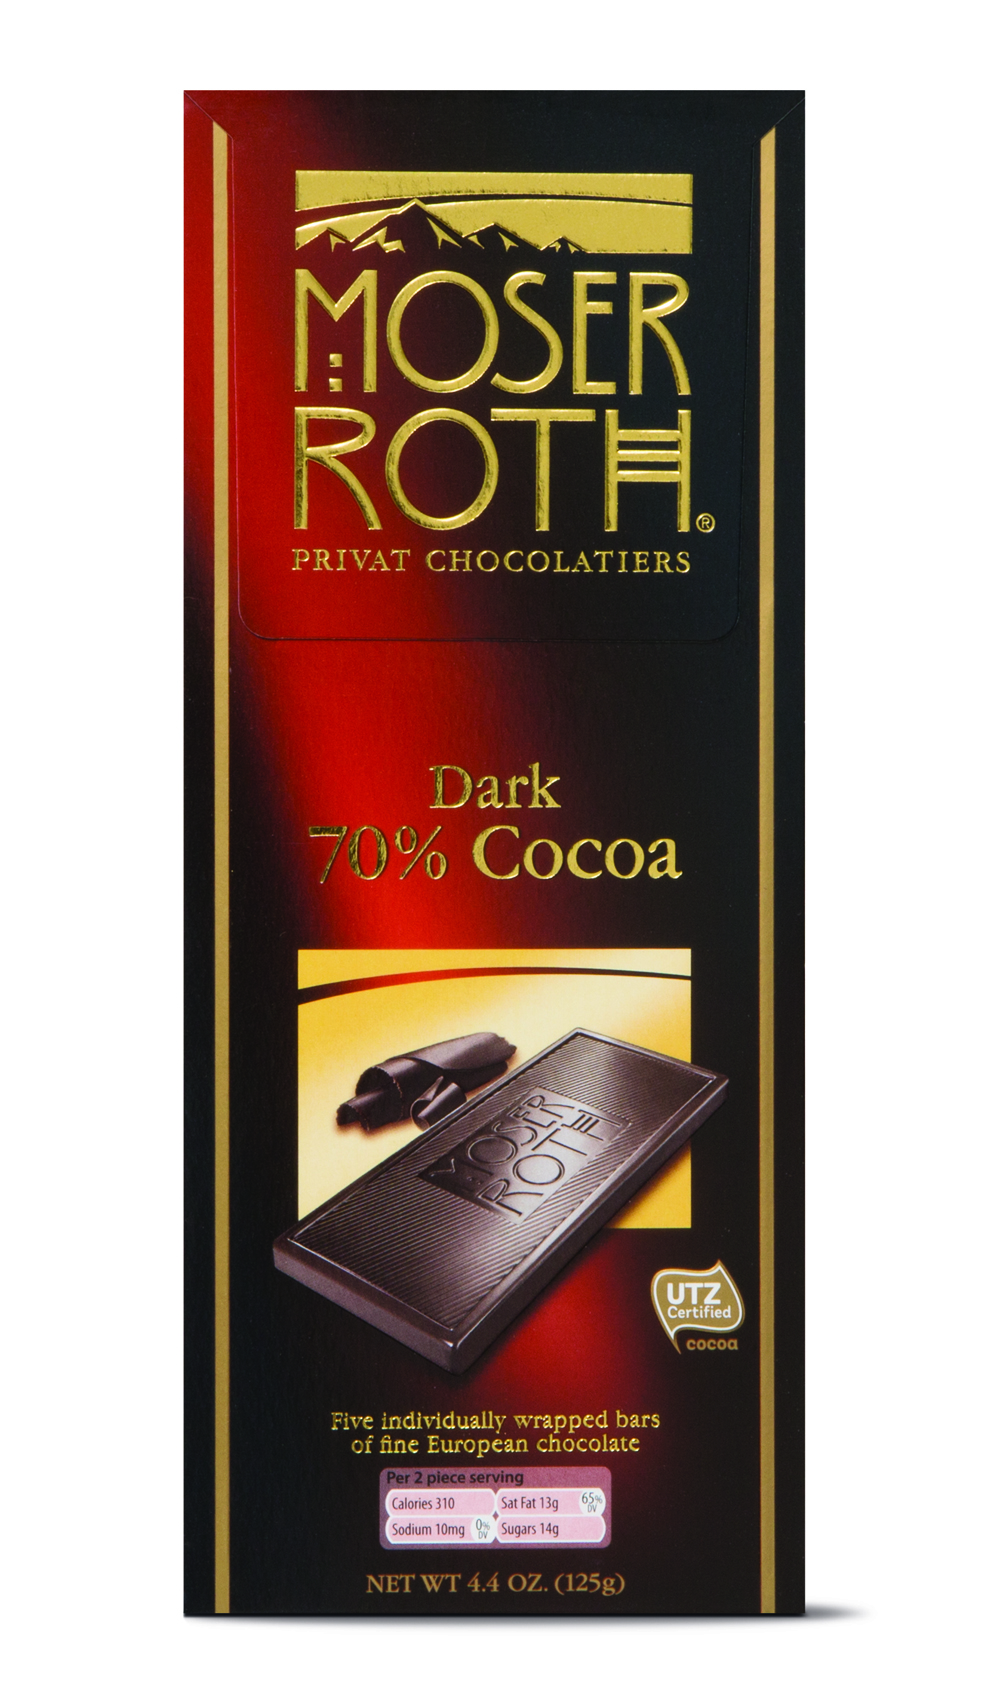 Mother's Day finds we love for under $10 at Aldi: Moser Roth Dark Chocolate Bar -- a fabulous addition to your gift for any chocolate loving mom and a great addition to your dessert spread for Mother's Day brunch. Yes, both, because at this price, you can afford two bars... and more! | Cool Mom Eats